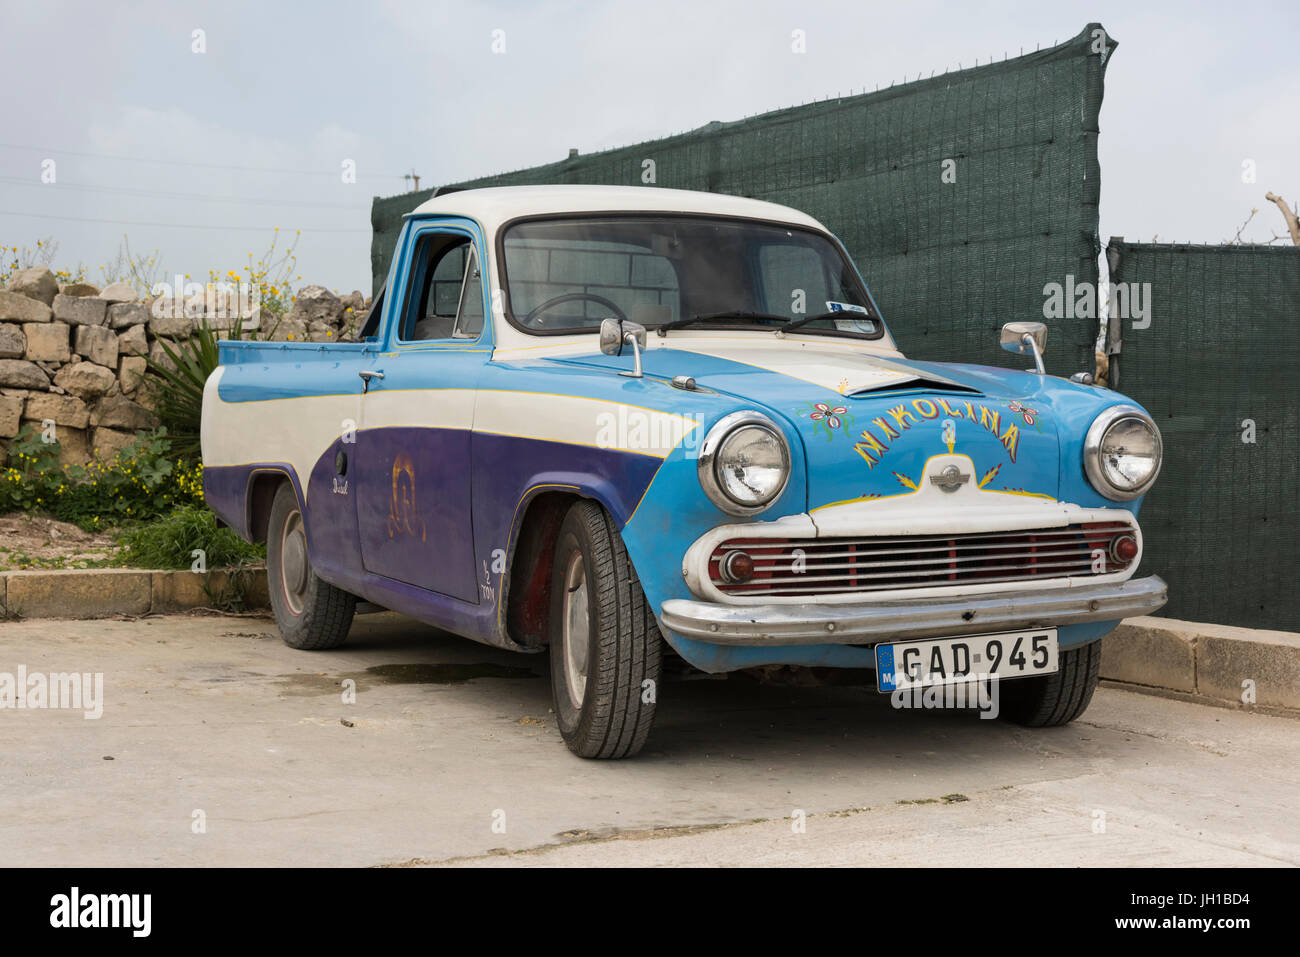 An old austin a55 pick up car or truck in Malta Stock Photo: 148163040 - Alamy